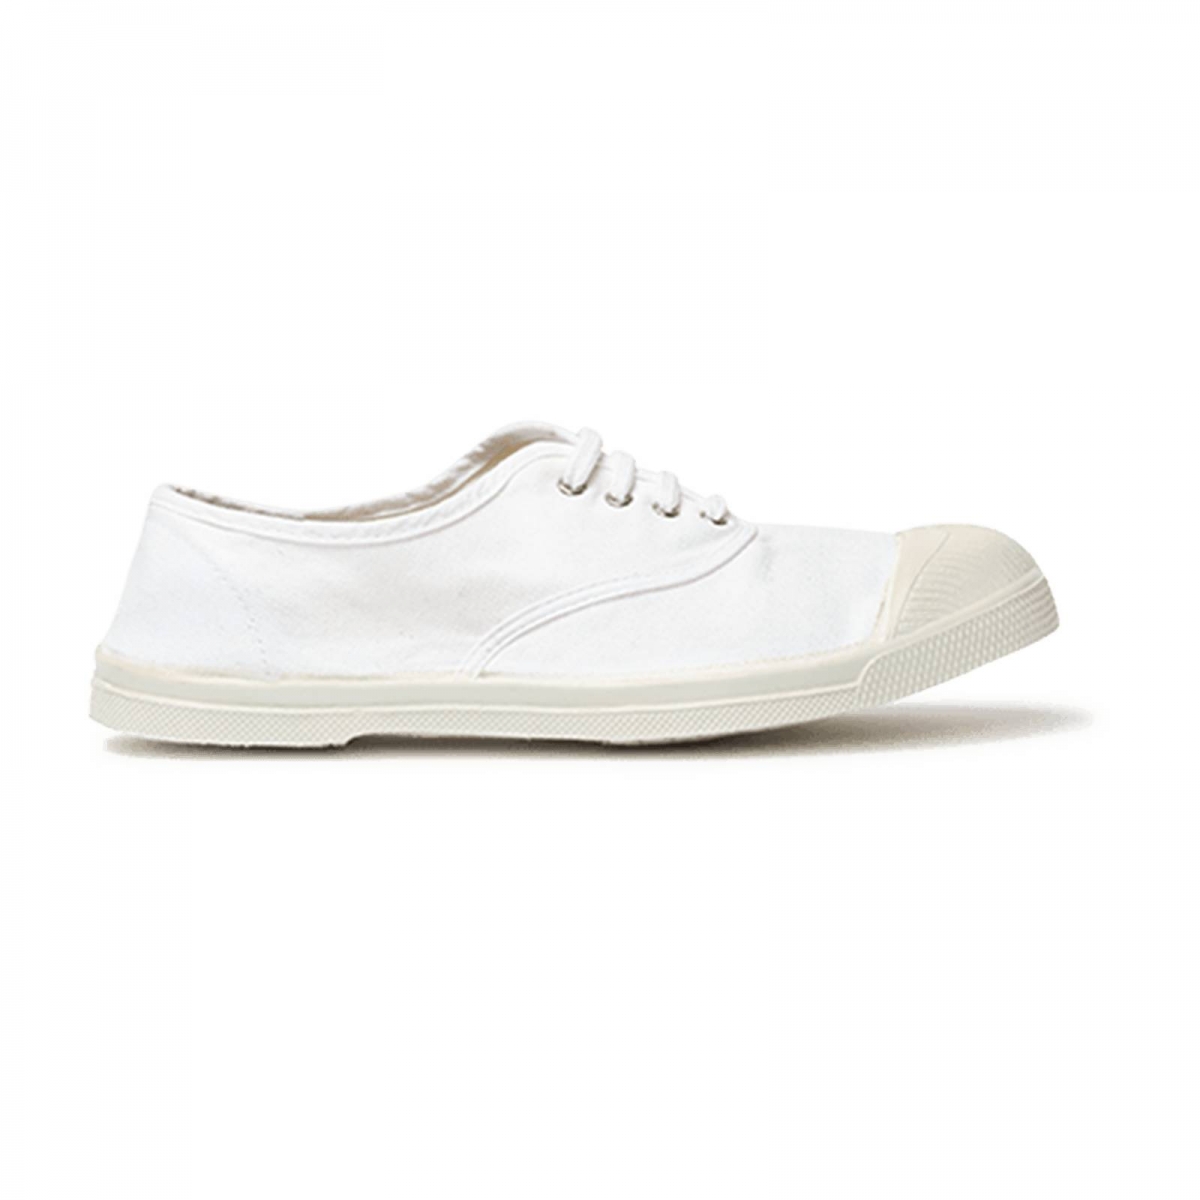 Bensimon Lace tennis sneakers adult white F15004 - 0101